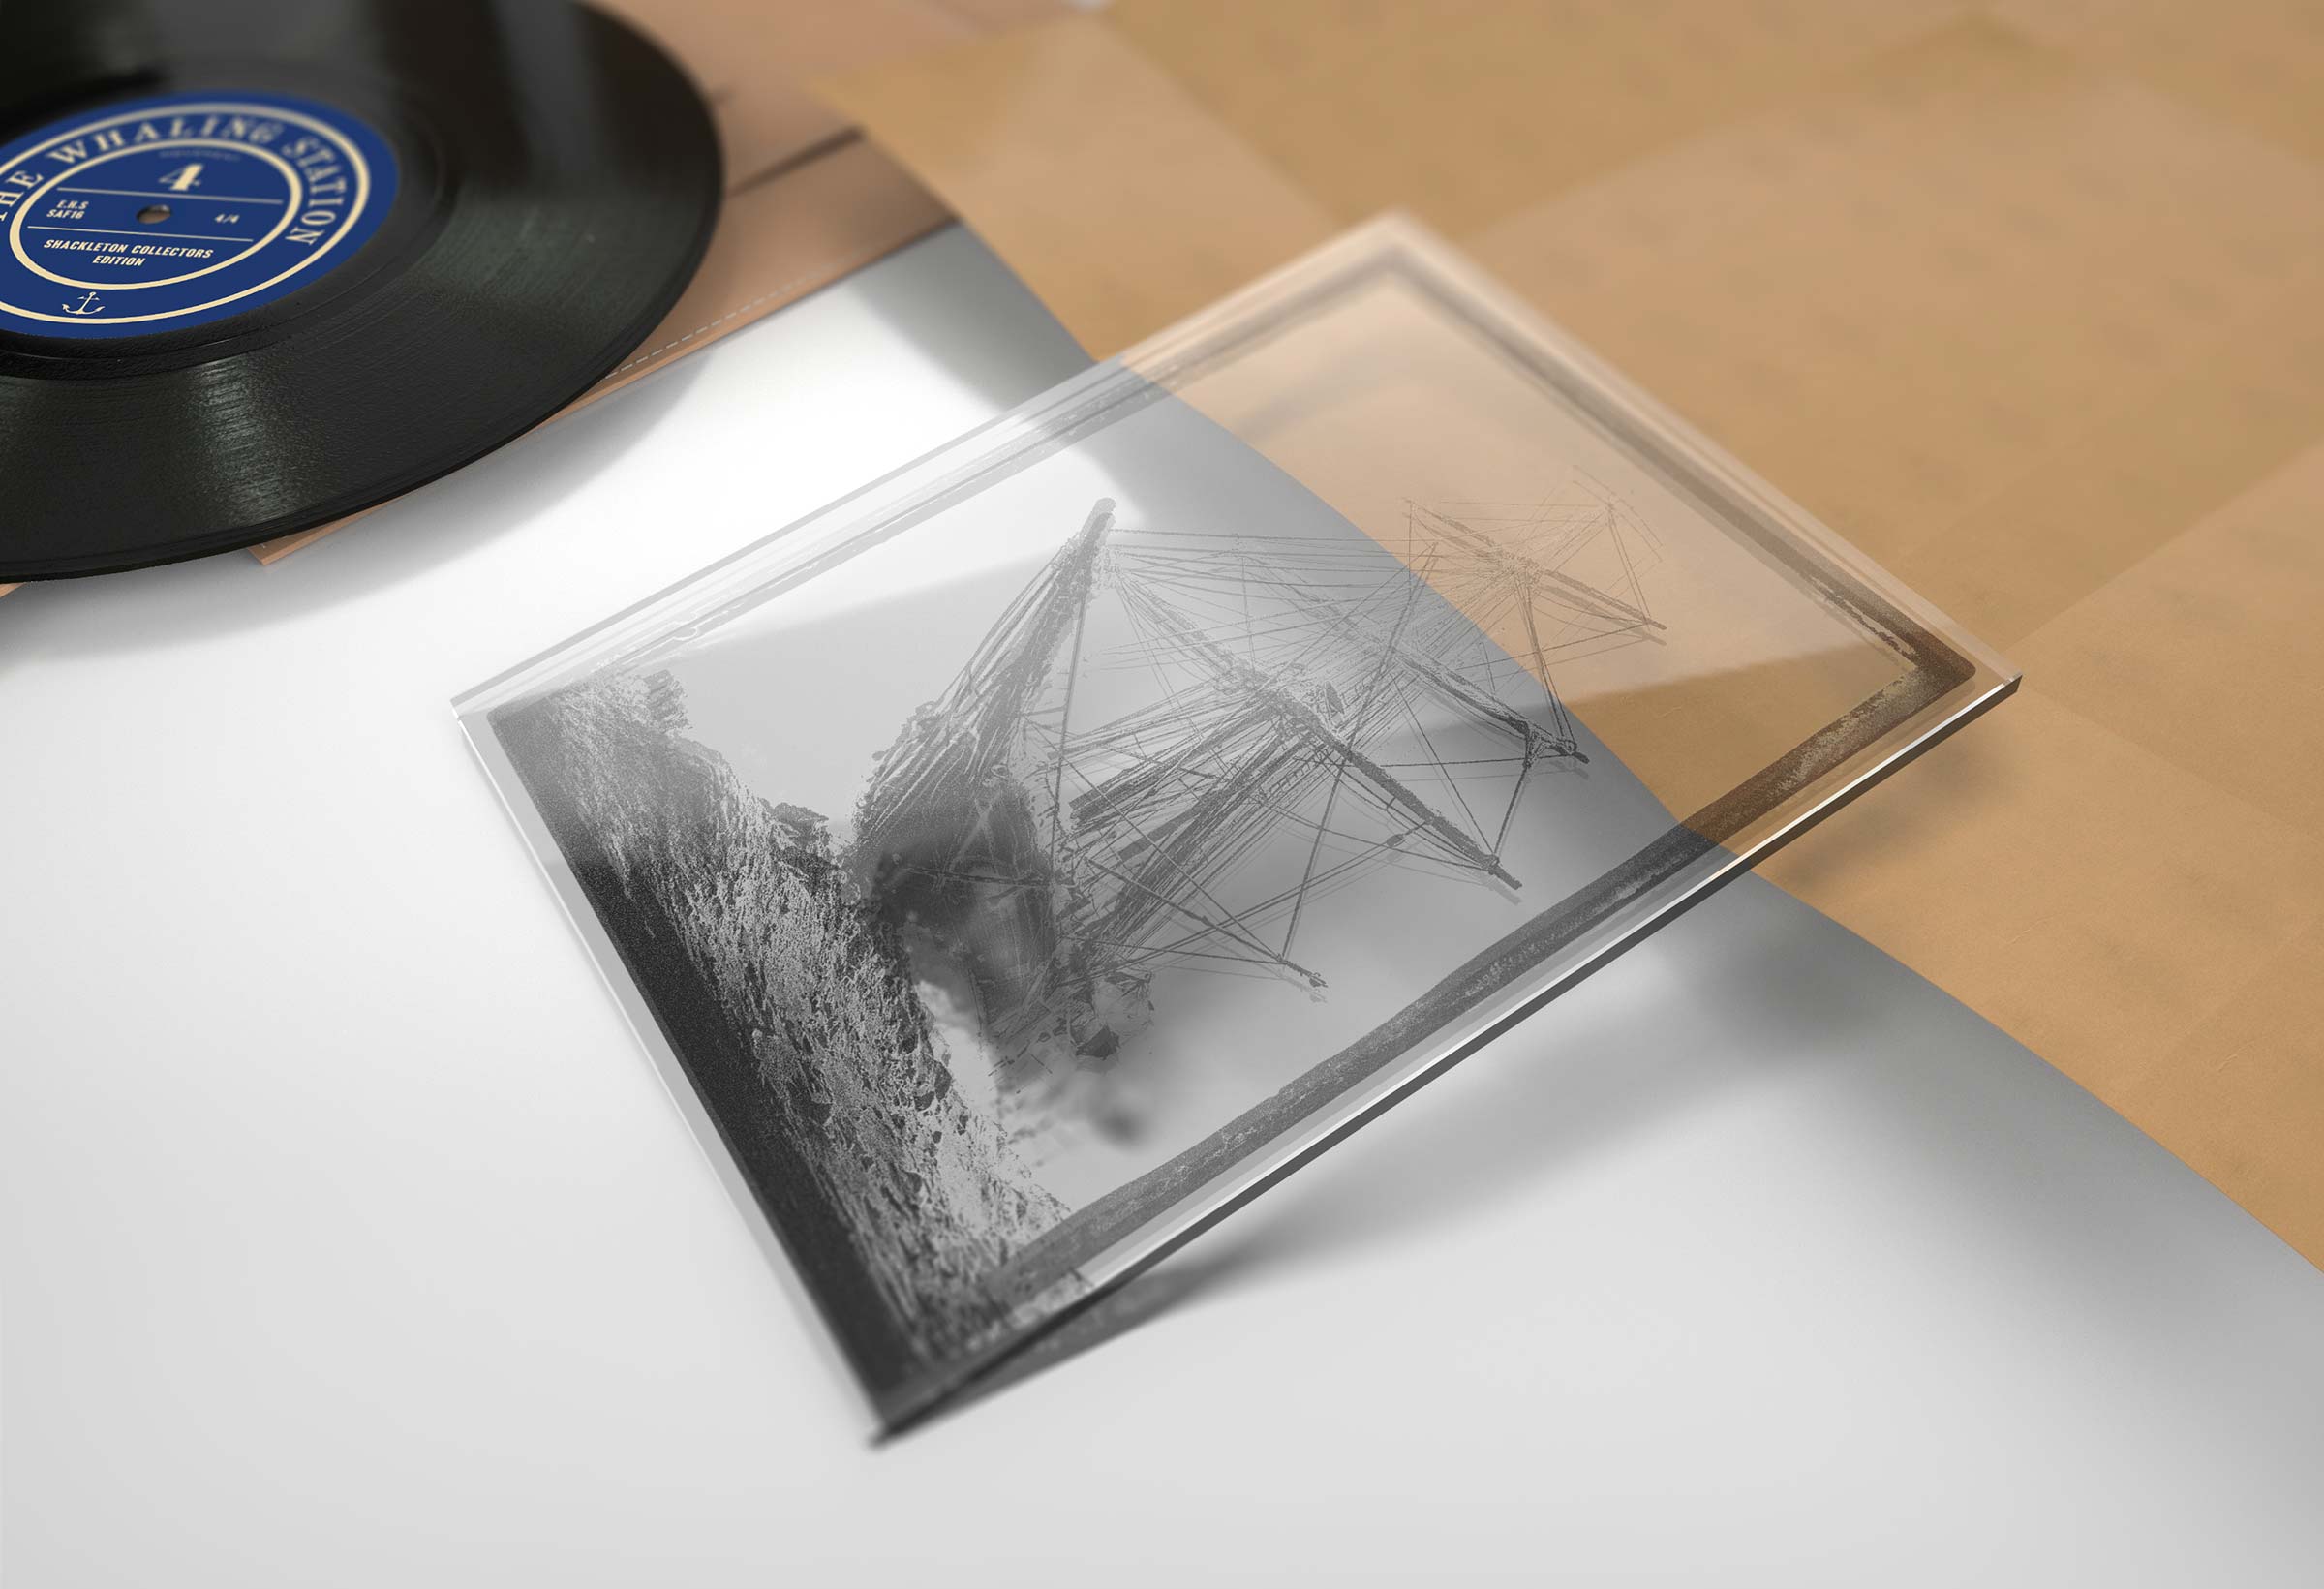 Printed onto glass to replicate 19th century photographic plates